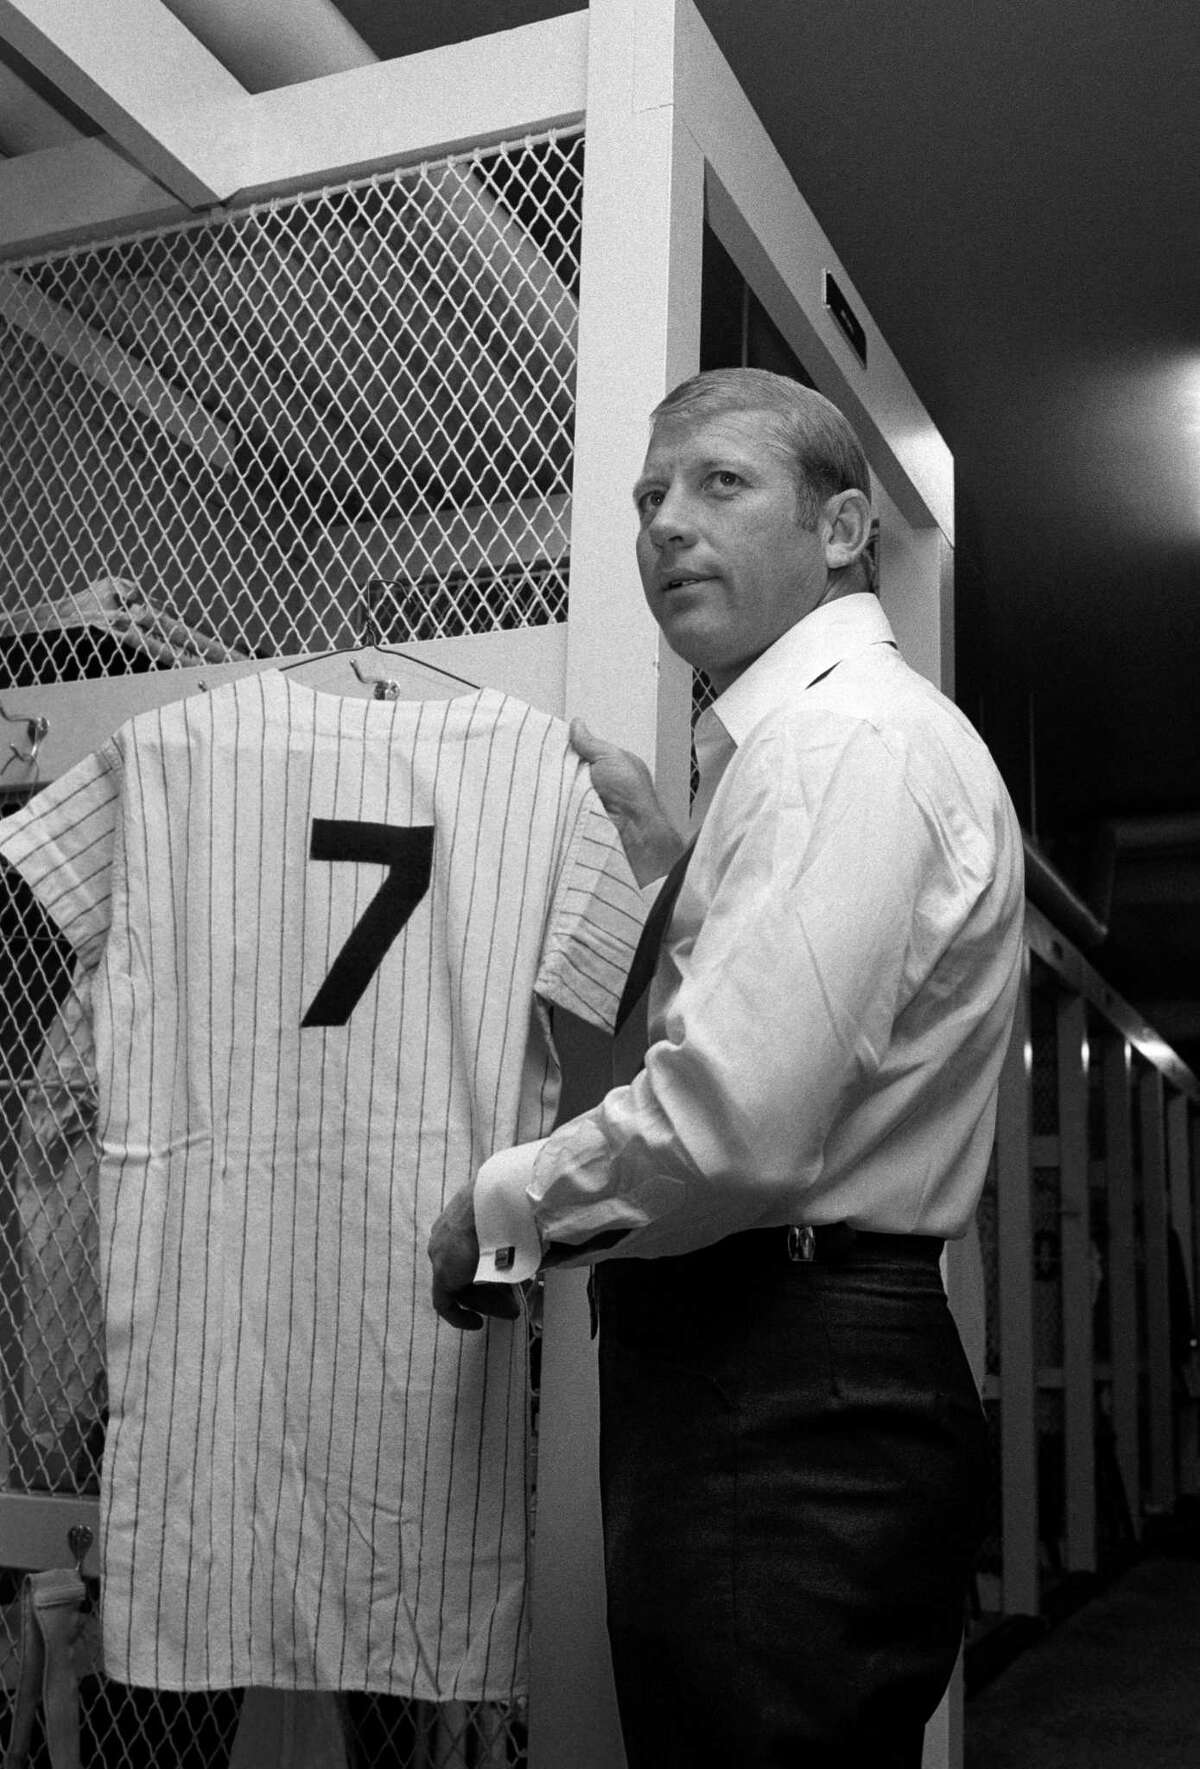 Mickey Mantle hangs up his uniform in the Yankee Stadium locker room on Mickey Mantle Day, June 8, 1969. The Yankees retired his number 7 on this day.